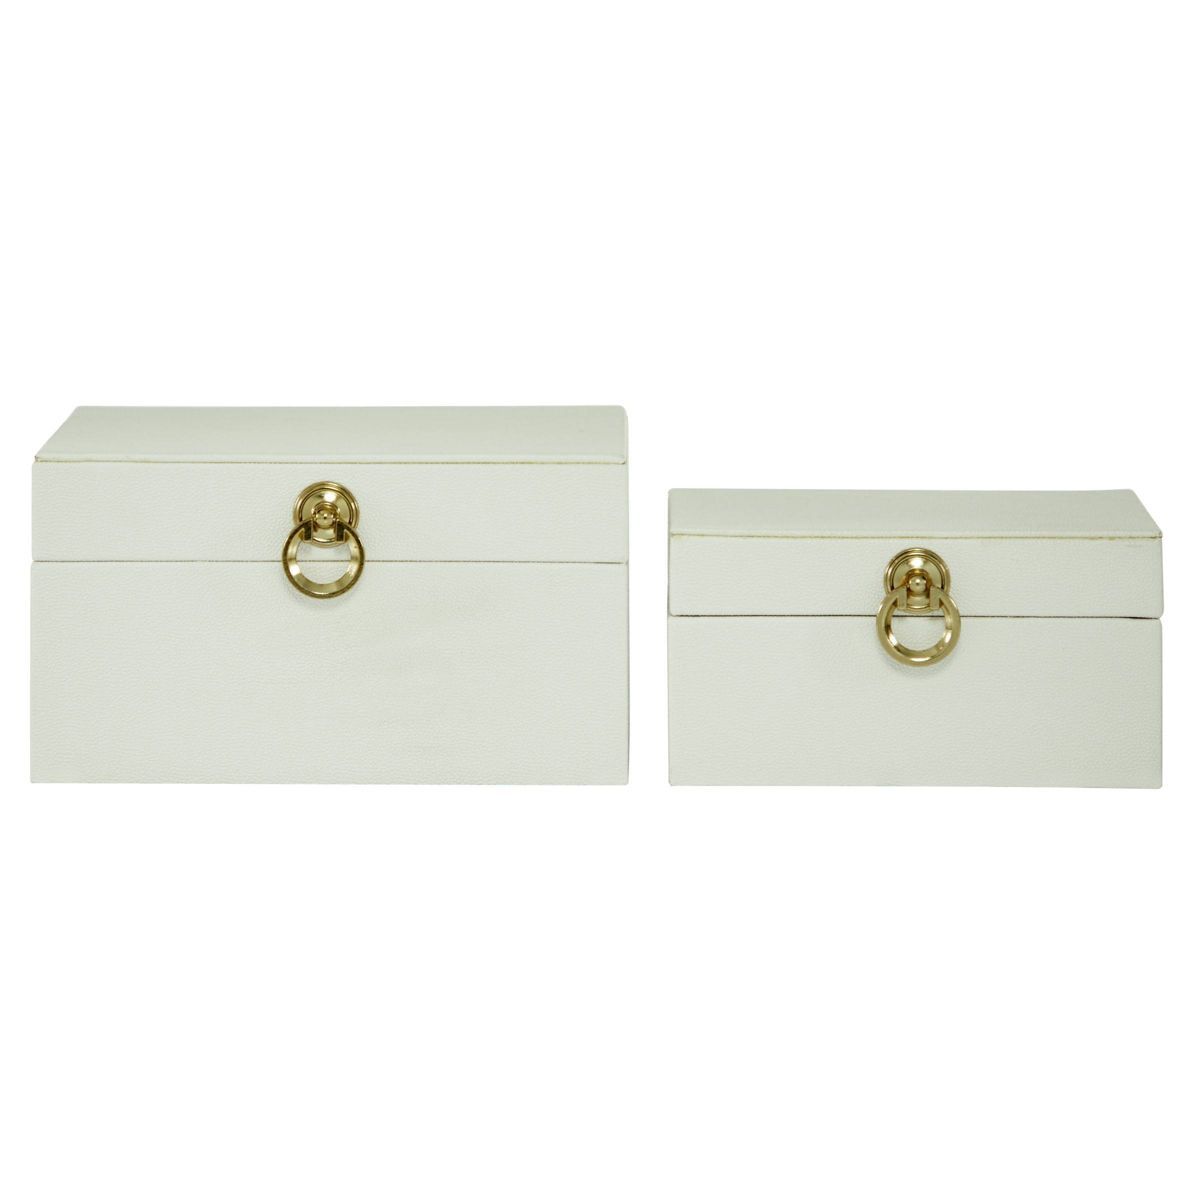 Set of 2 Faux Shagreen Wood Box with Metal Ring Fixtures - Olivia & May | Target